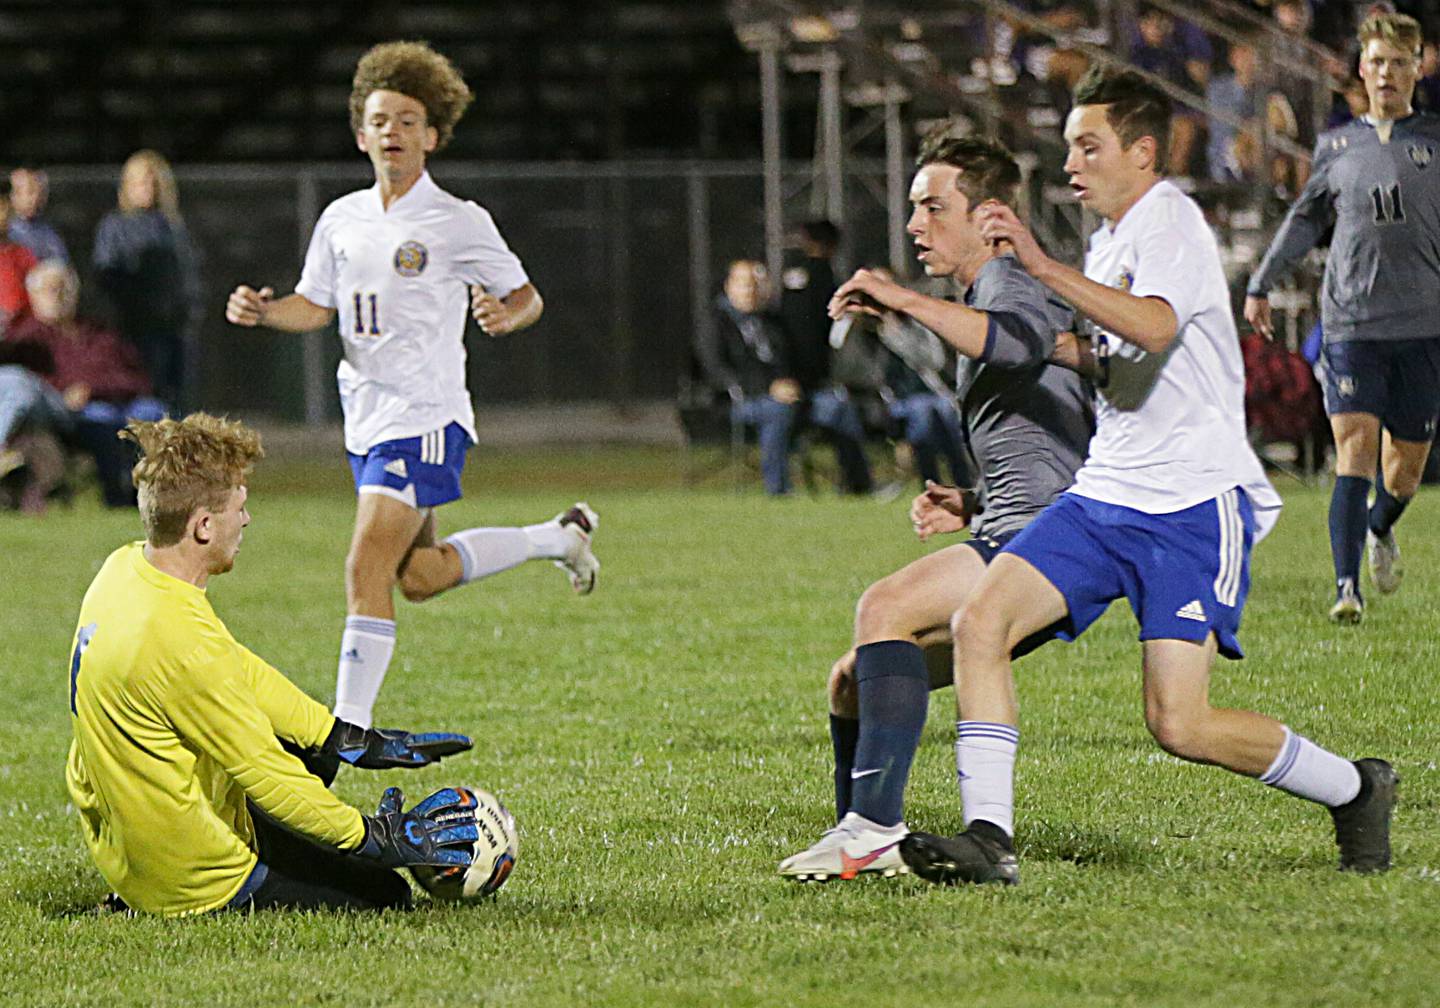 Somonauk's goalkeeper Coleton Eade blocks a shot from Quincy Notre Dame in the Class 1A Sectional semifinal game in Chillicothe on Tuesday Oct. 19, 2021.